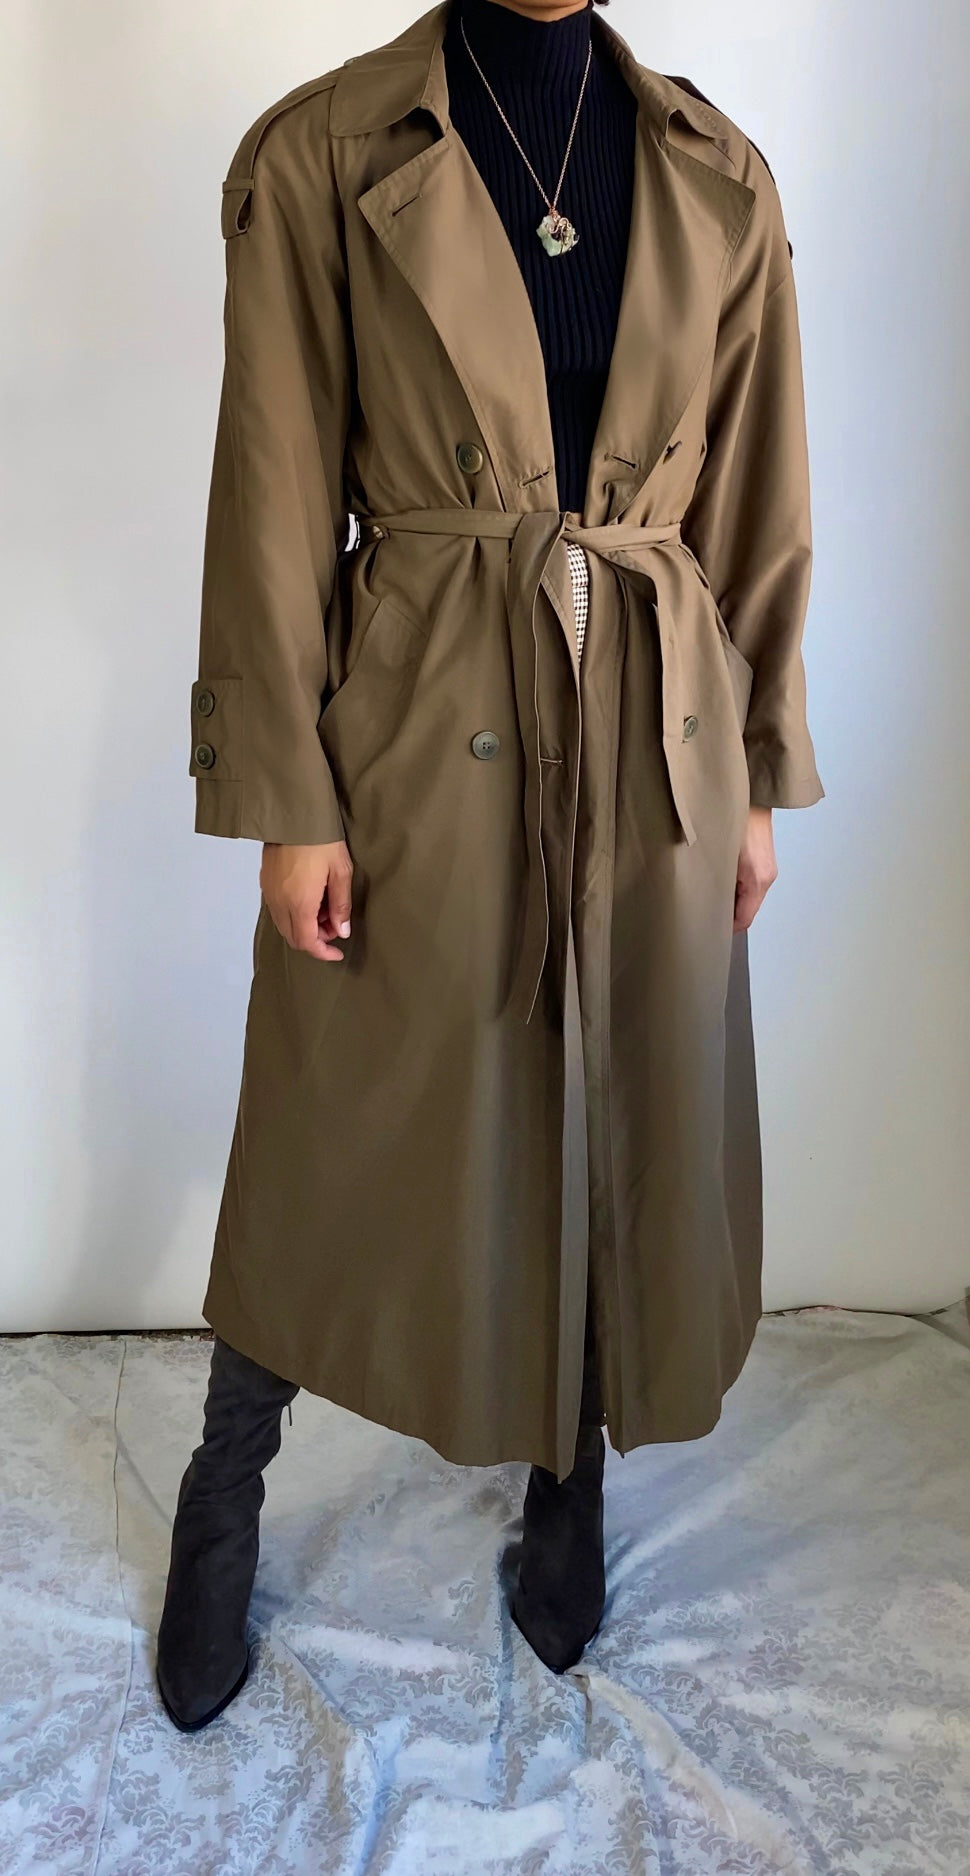 Vintage Double Breasted Belted Trench Coat Camel | Brown Trench Coat | Boyfriend Trench Coat (US10)